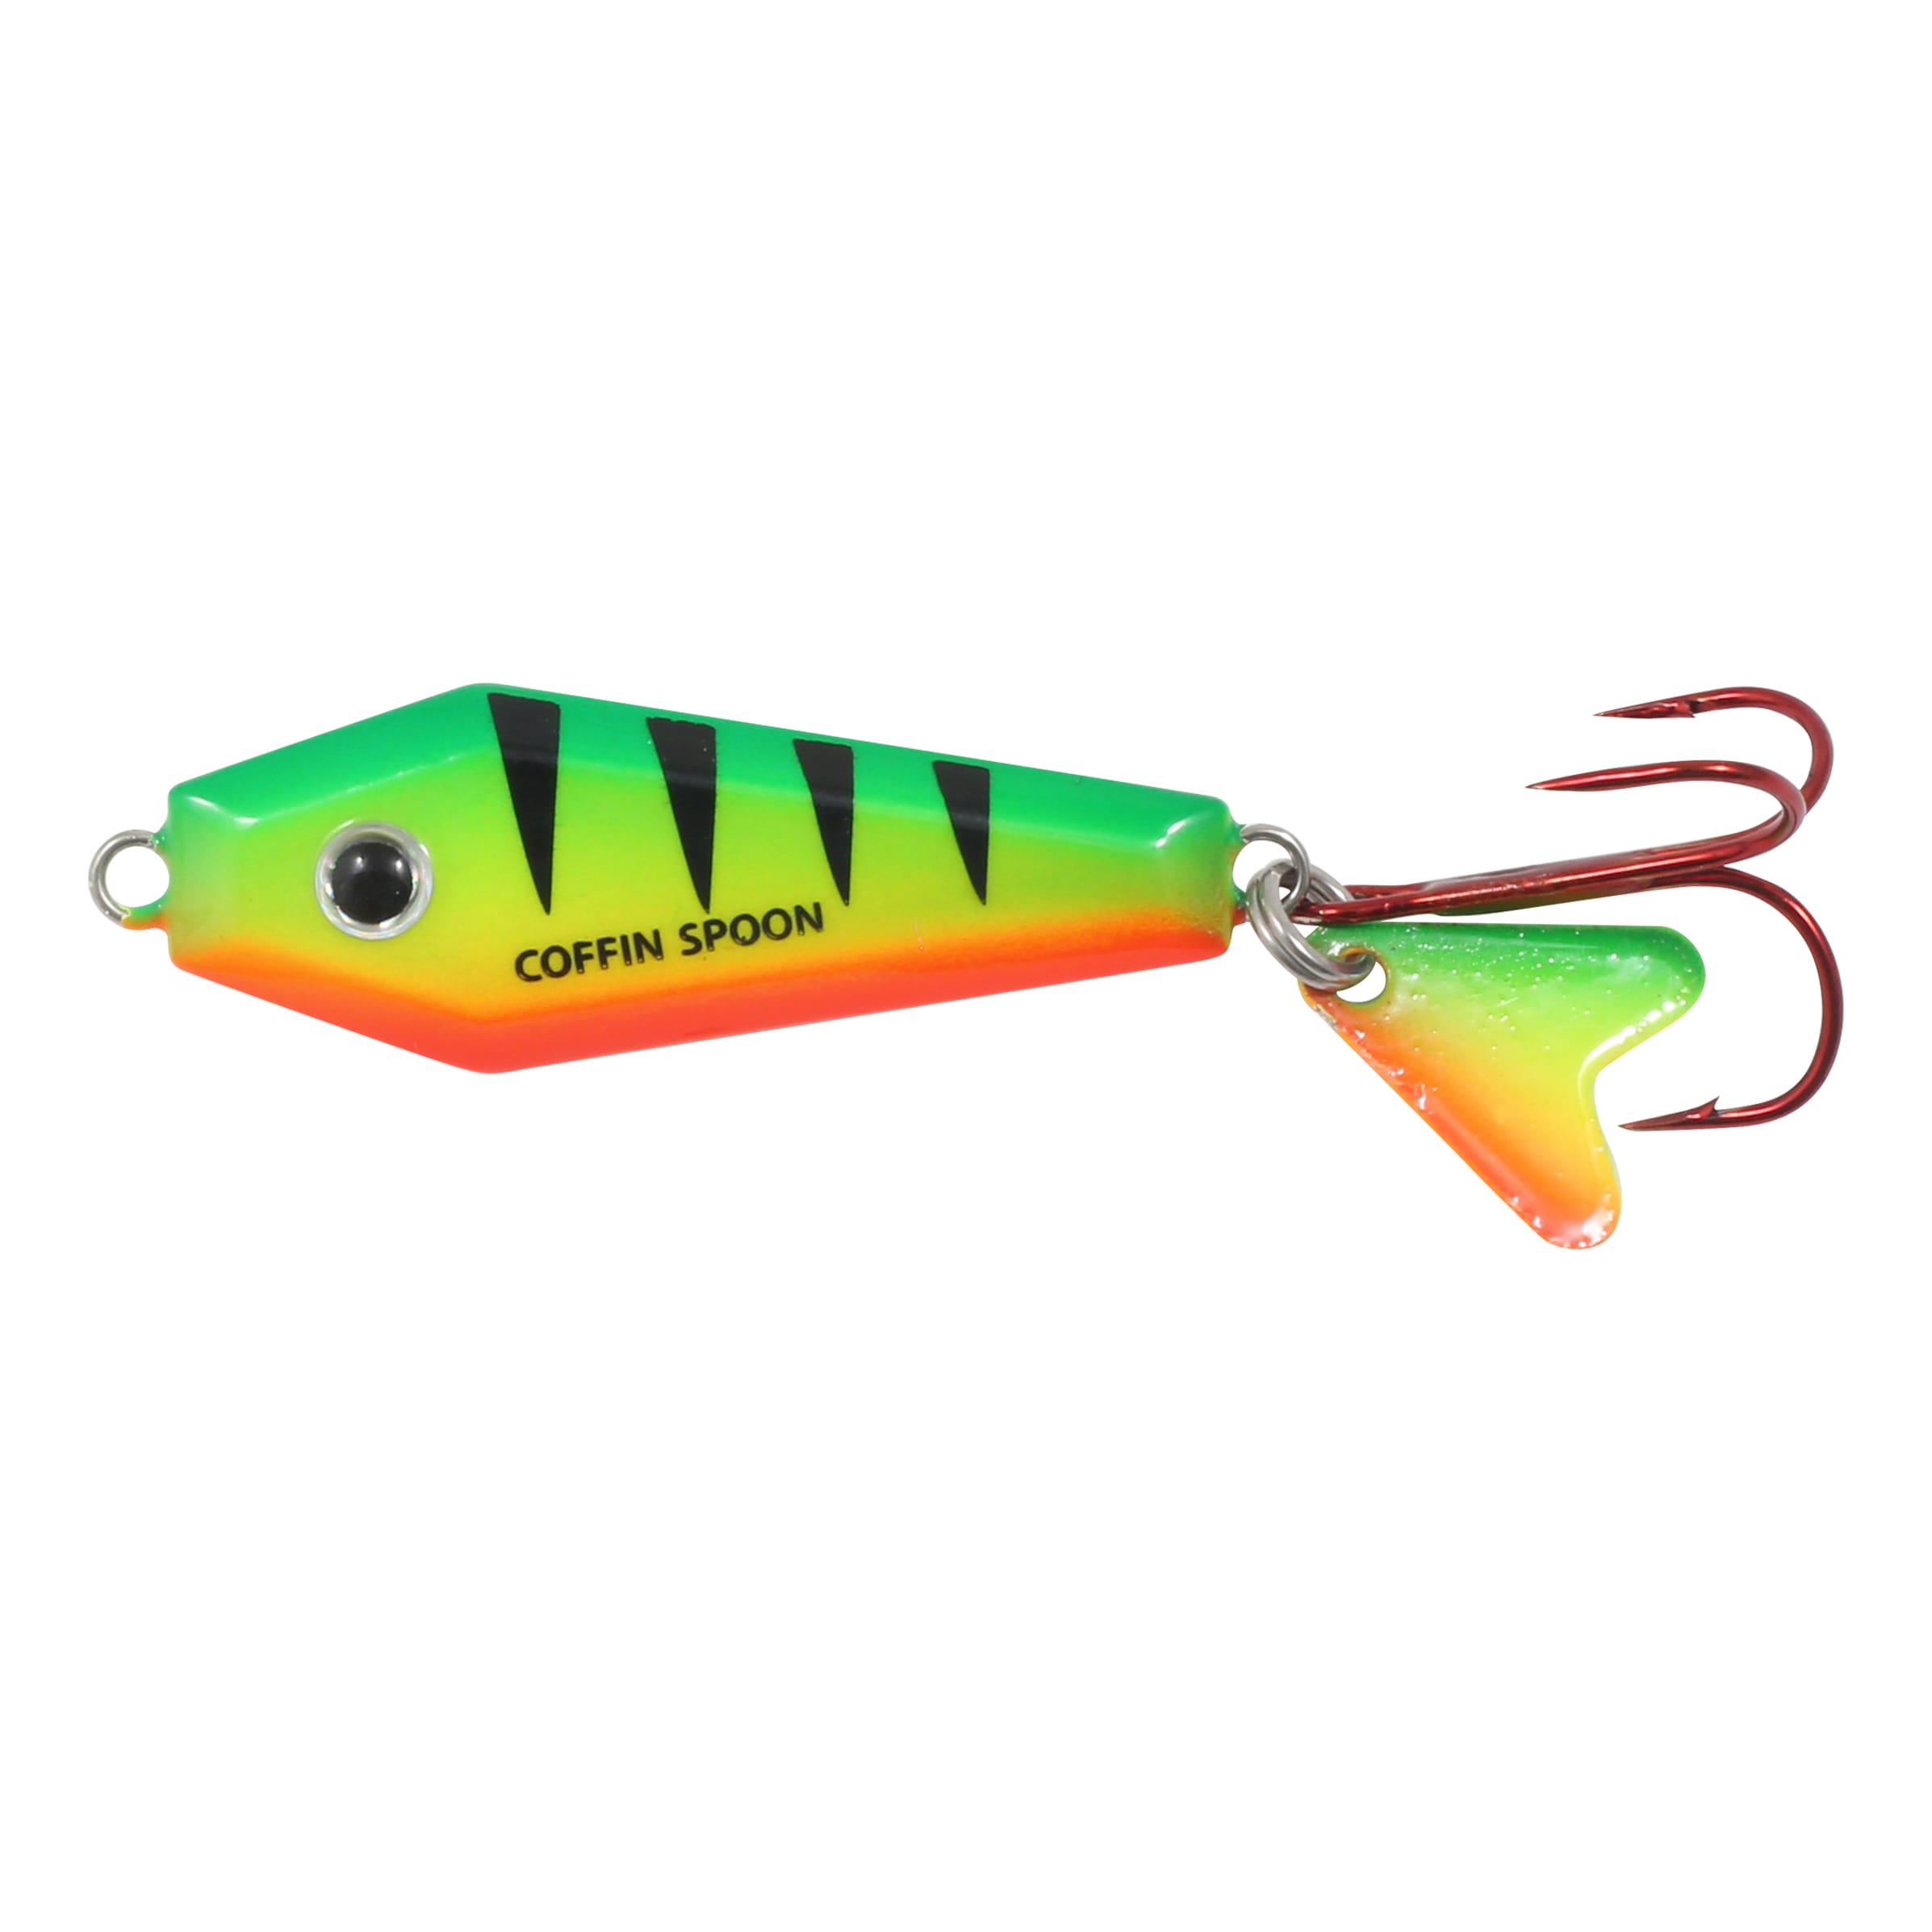 Fishing Lures for sale in Sandy Lake, Manitoba